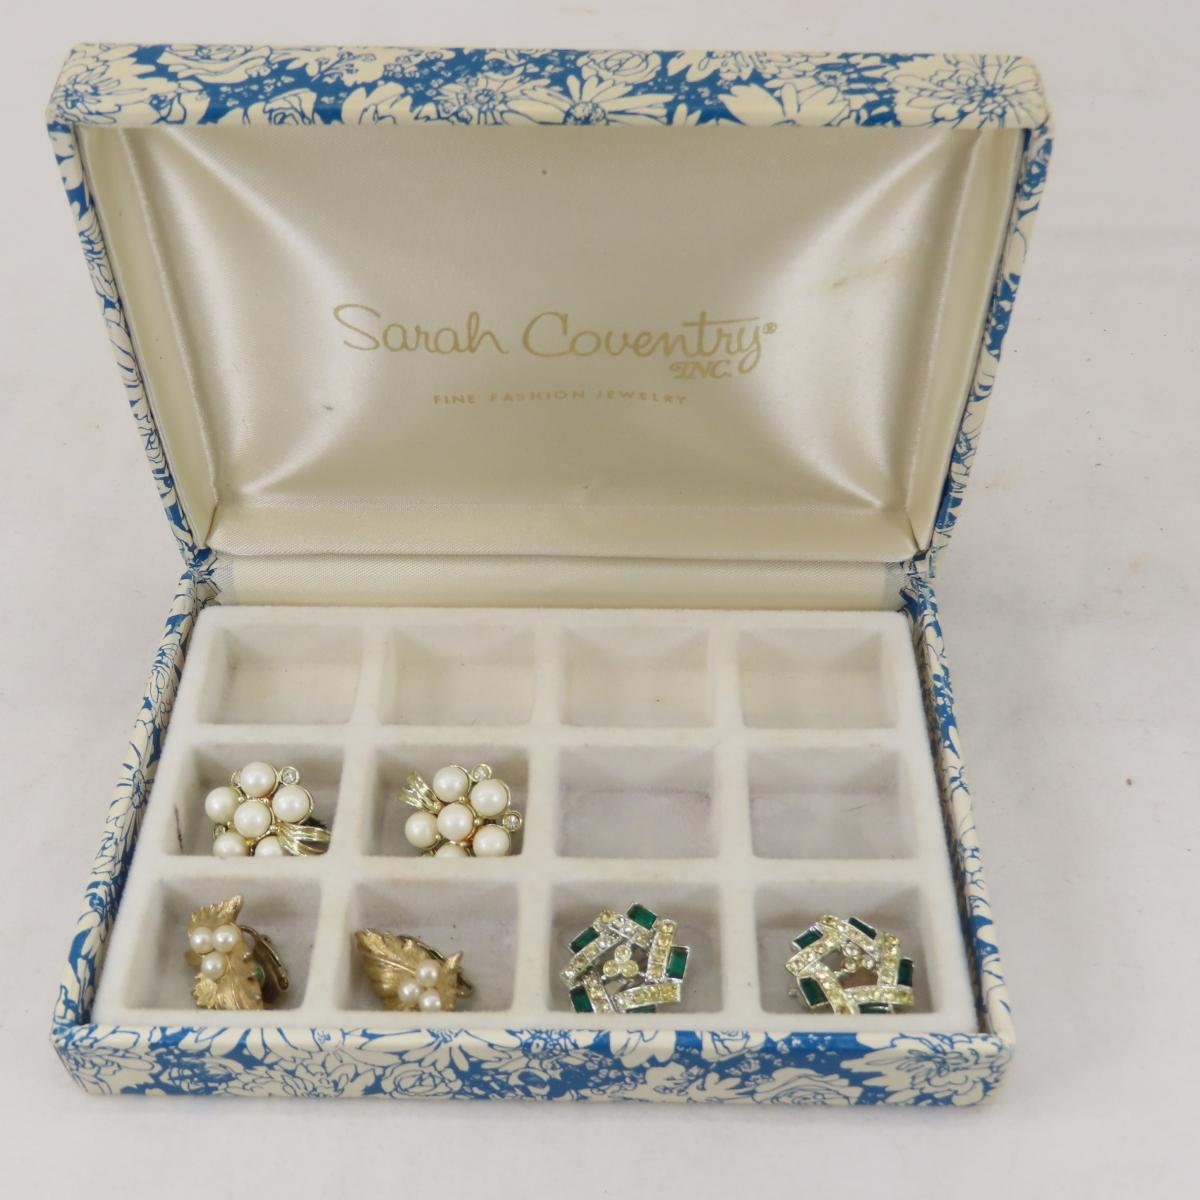 Vintage Sarah Coventry Jewelry & Boxes